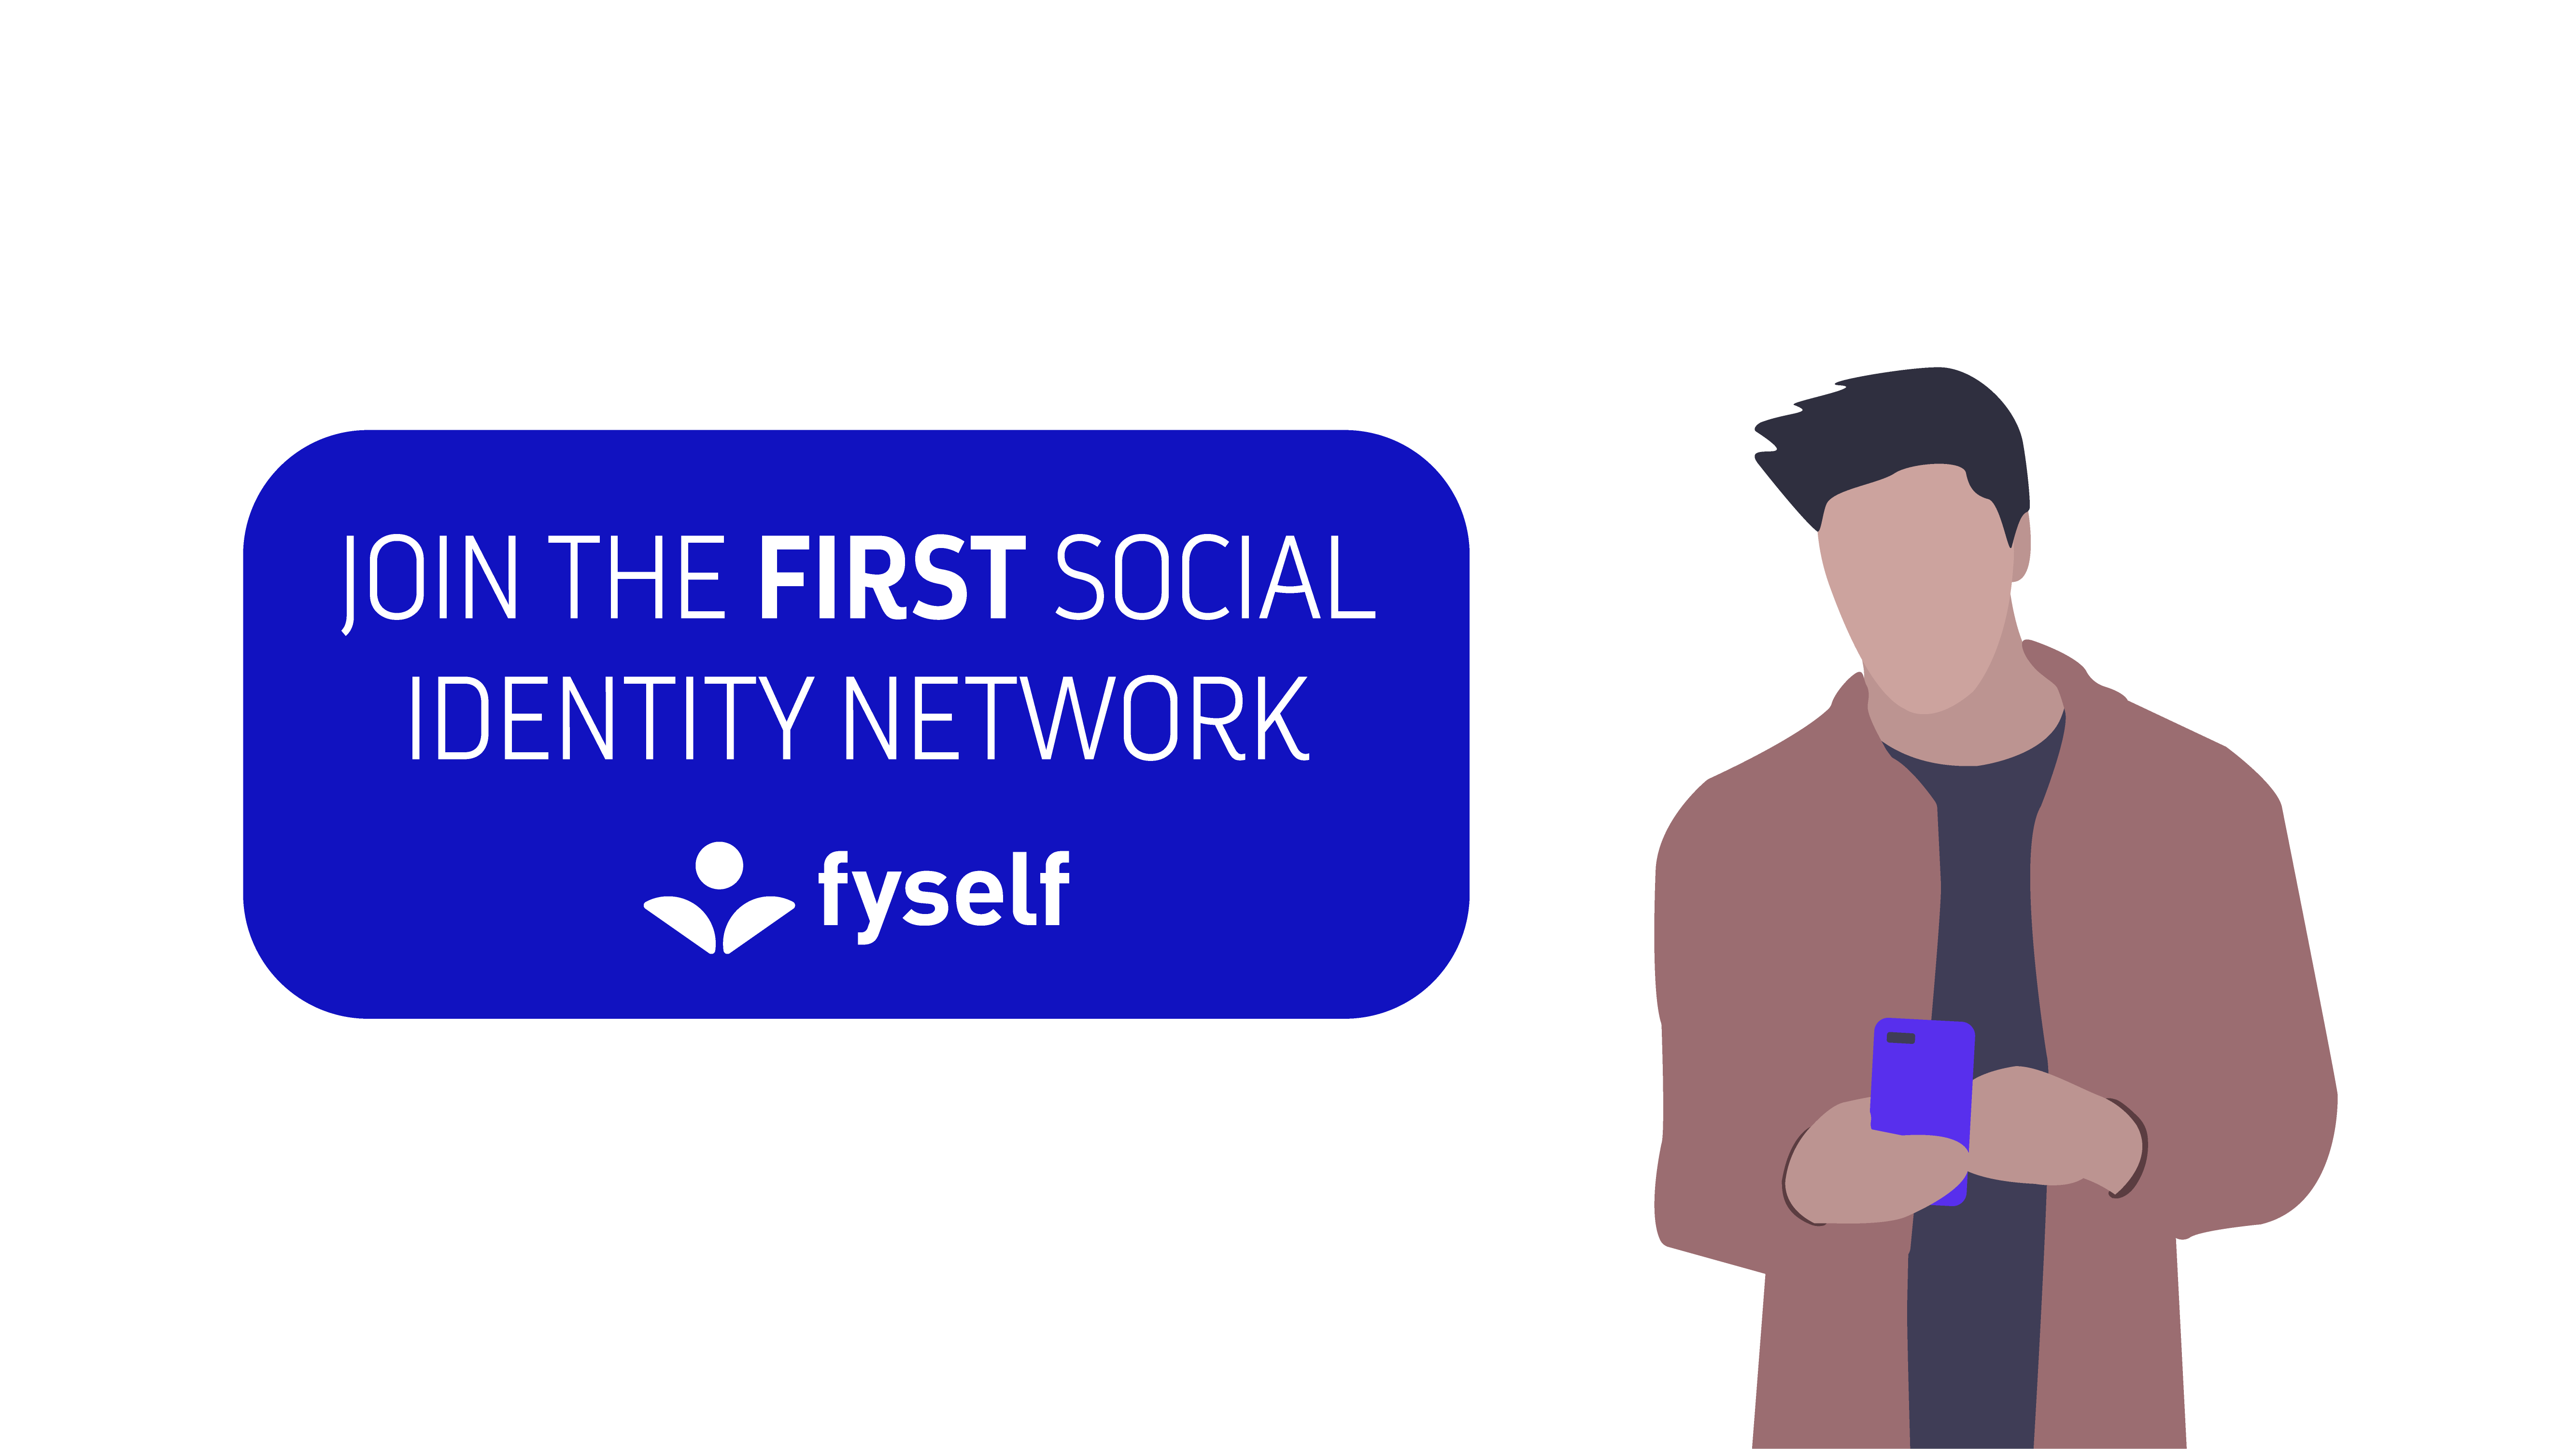 How to understand a social identity network?